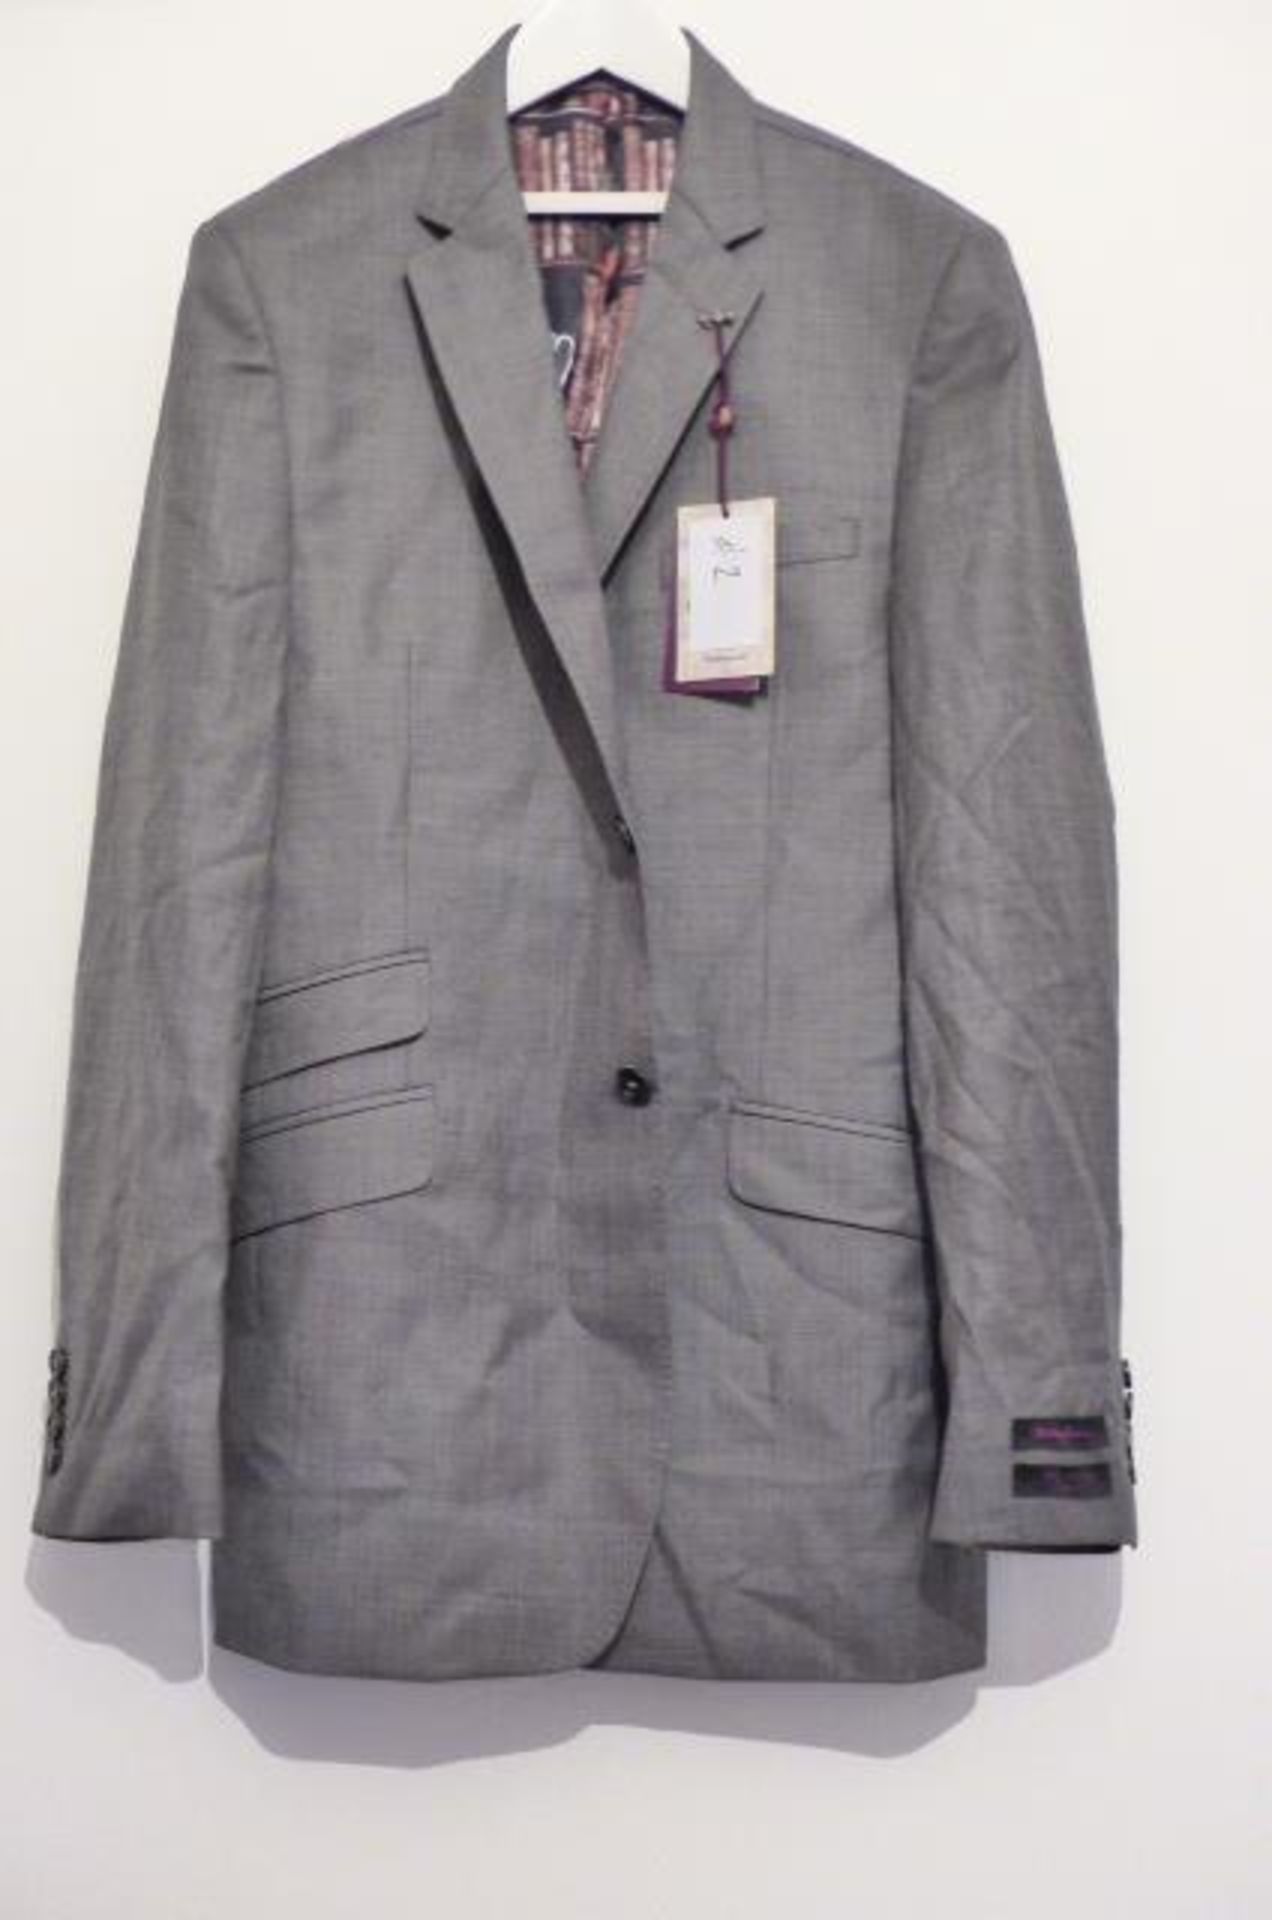 Ted Baker Mens Dark Grey Jacket 40R New With Tags